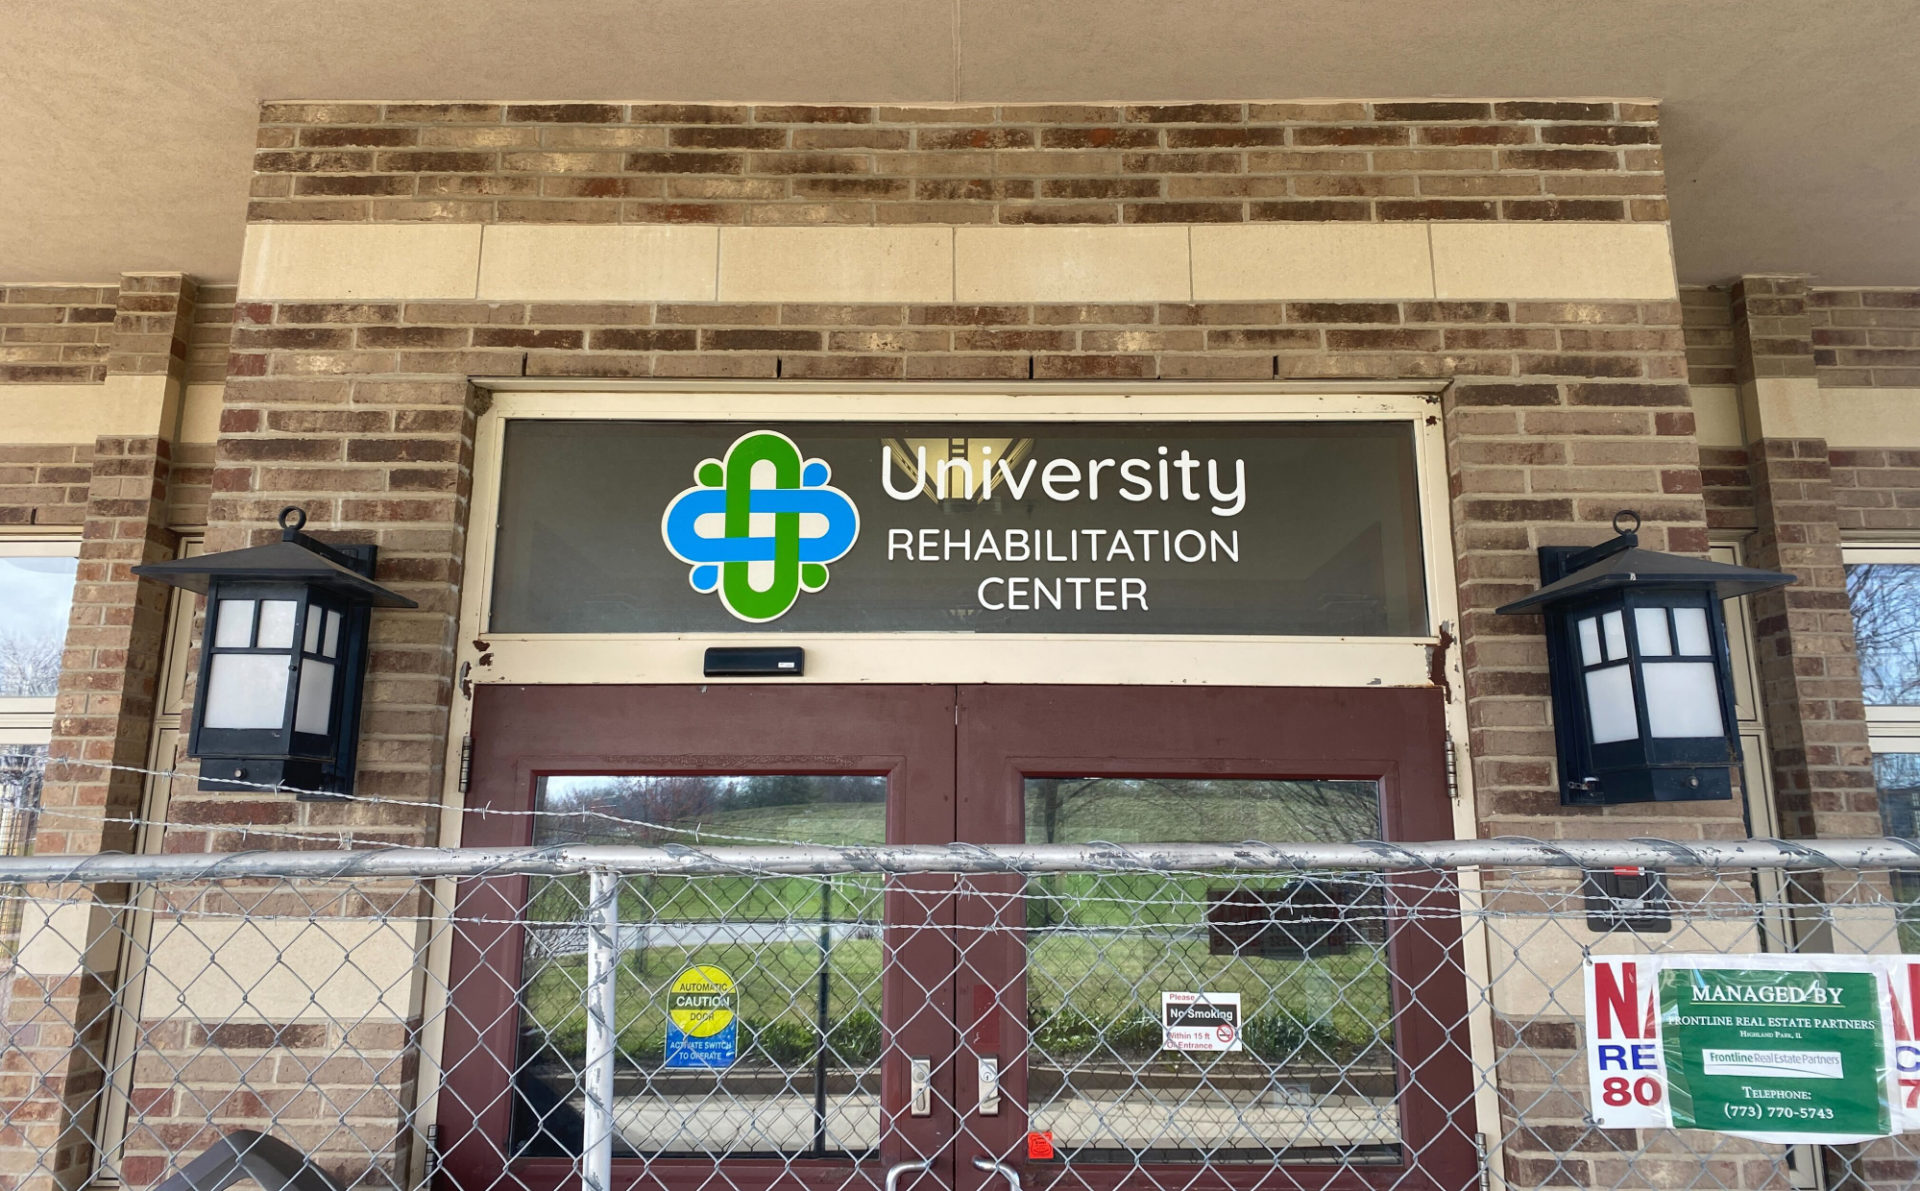 Entrance to the Champaign County Nursing Home / University Rehabilitation Center. There is a large chain link and barbed wire fence in front of the entryway, around the entire building.